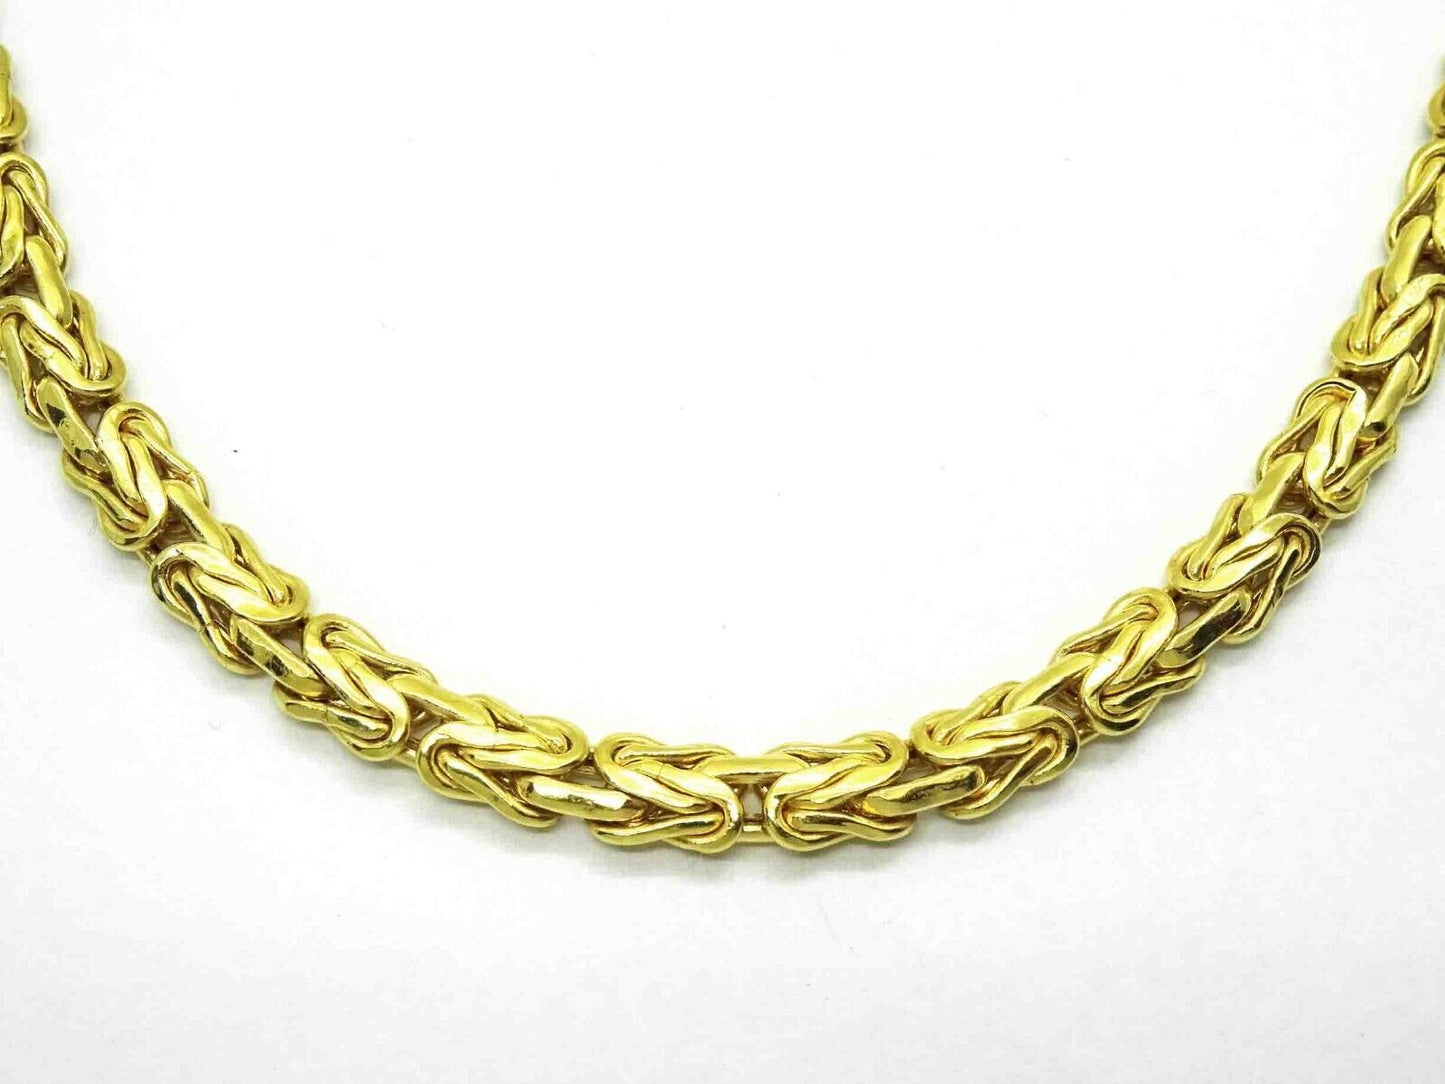 6mm Wide Italian Byzantine Chain Necklace 14k Gold 16.5" Long 20.2 Grams